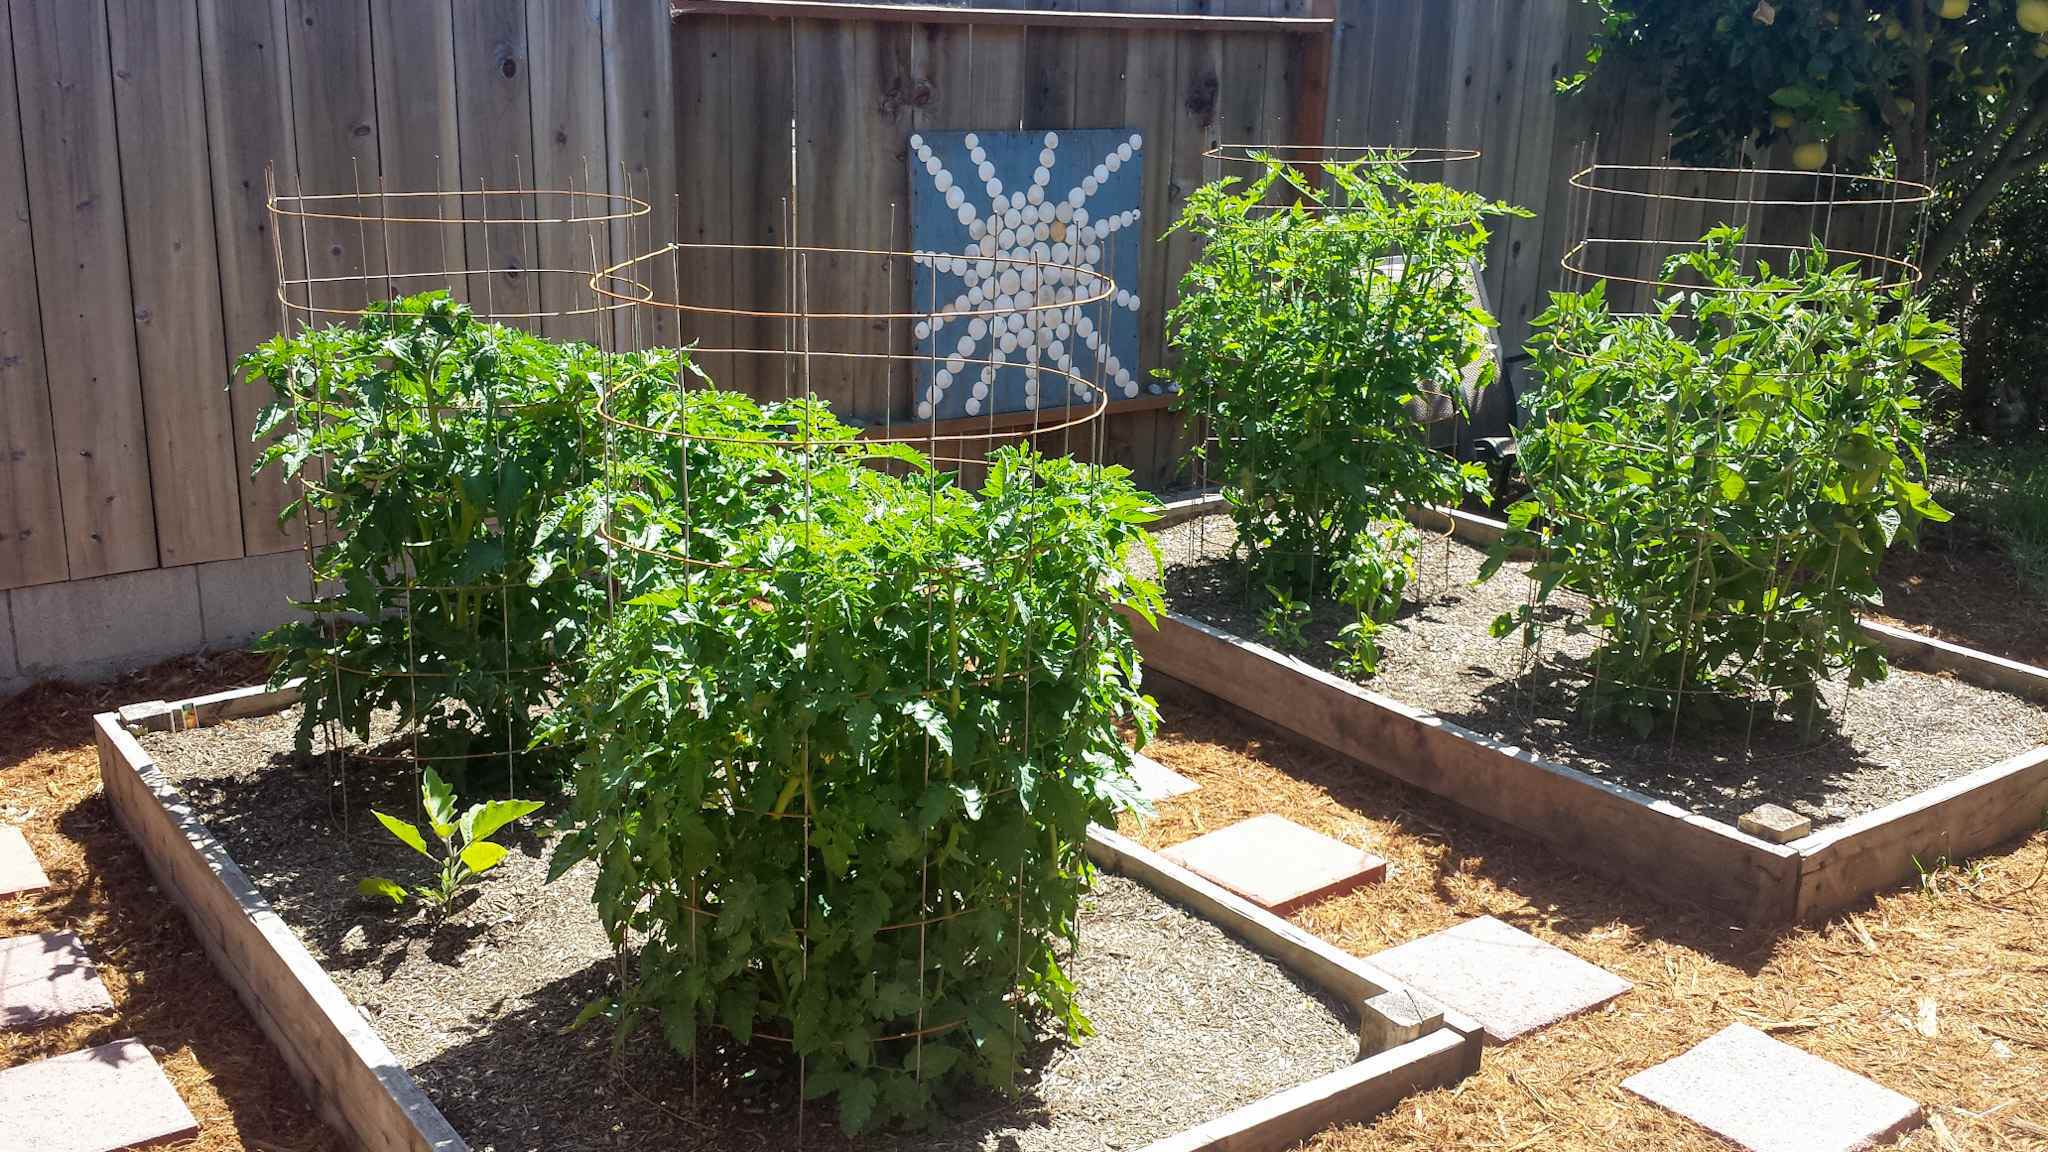 Four tomato plants growing in two raised garden beds is shown. They are all being supported by tomato cages and each one is between two and three feet tall as they are not fully mature yet.